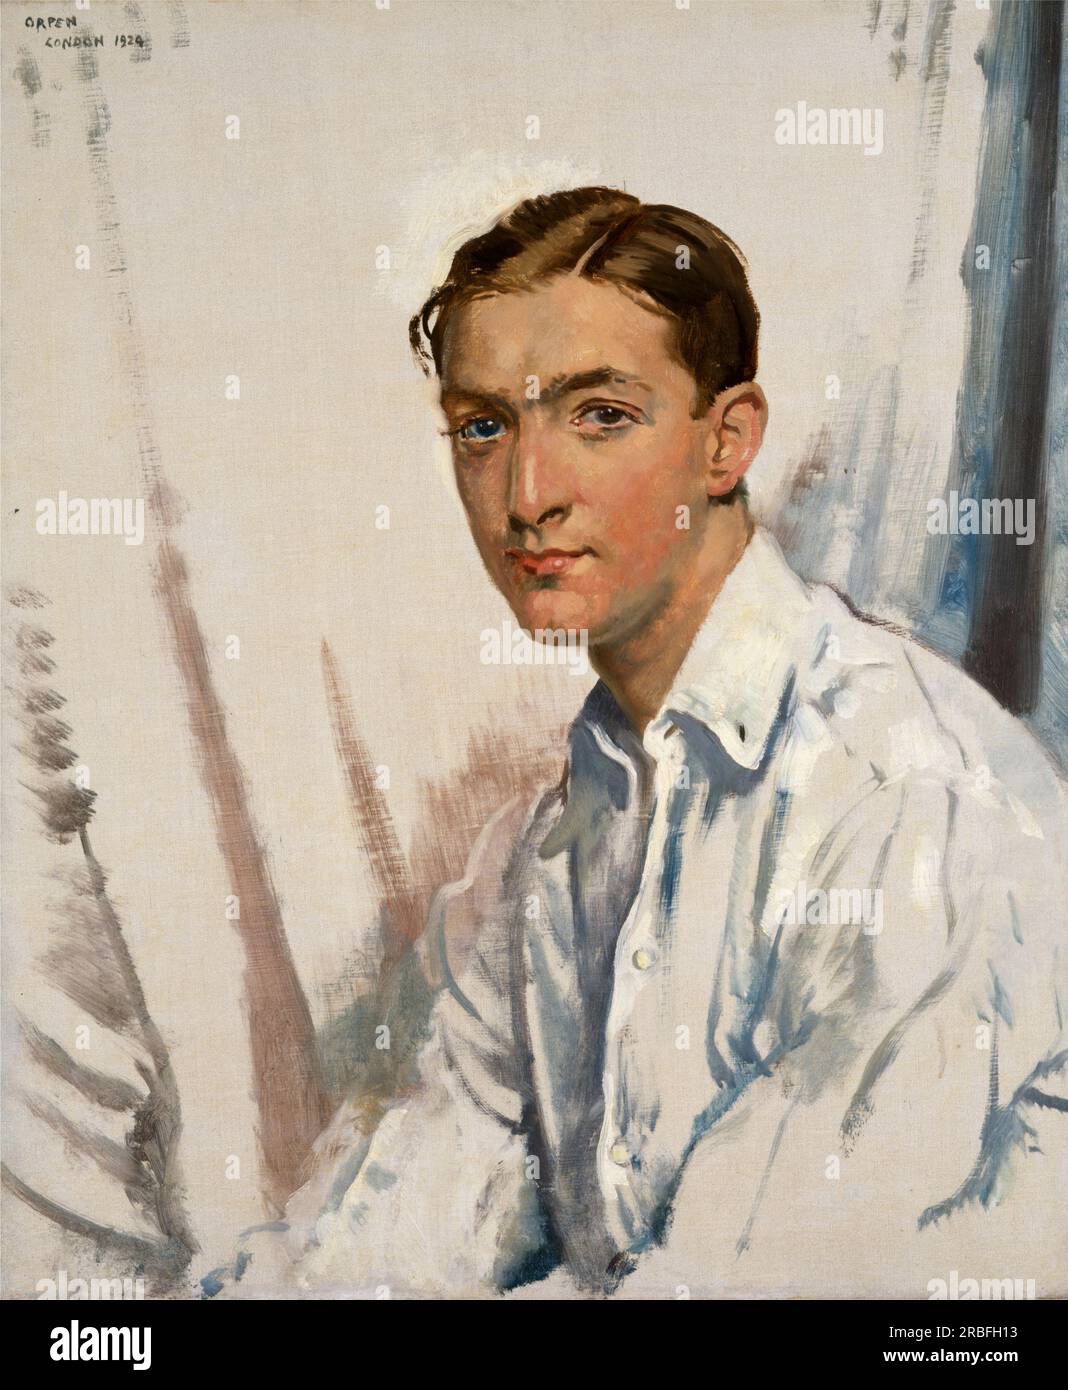 Sir William Orpen by Paul Mellon, 1924. Stock Photo